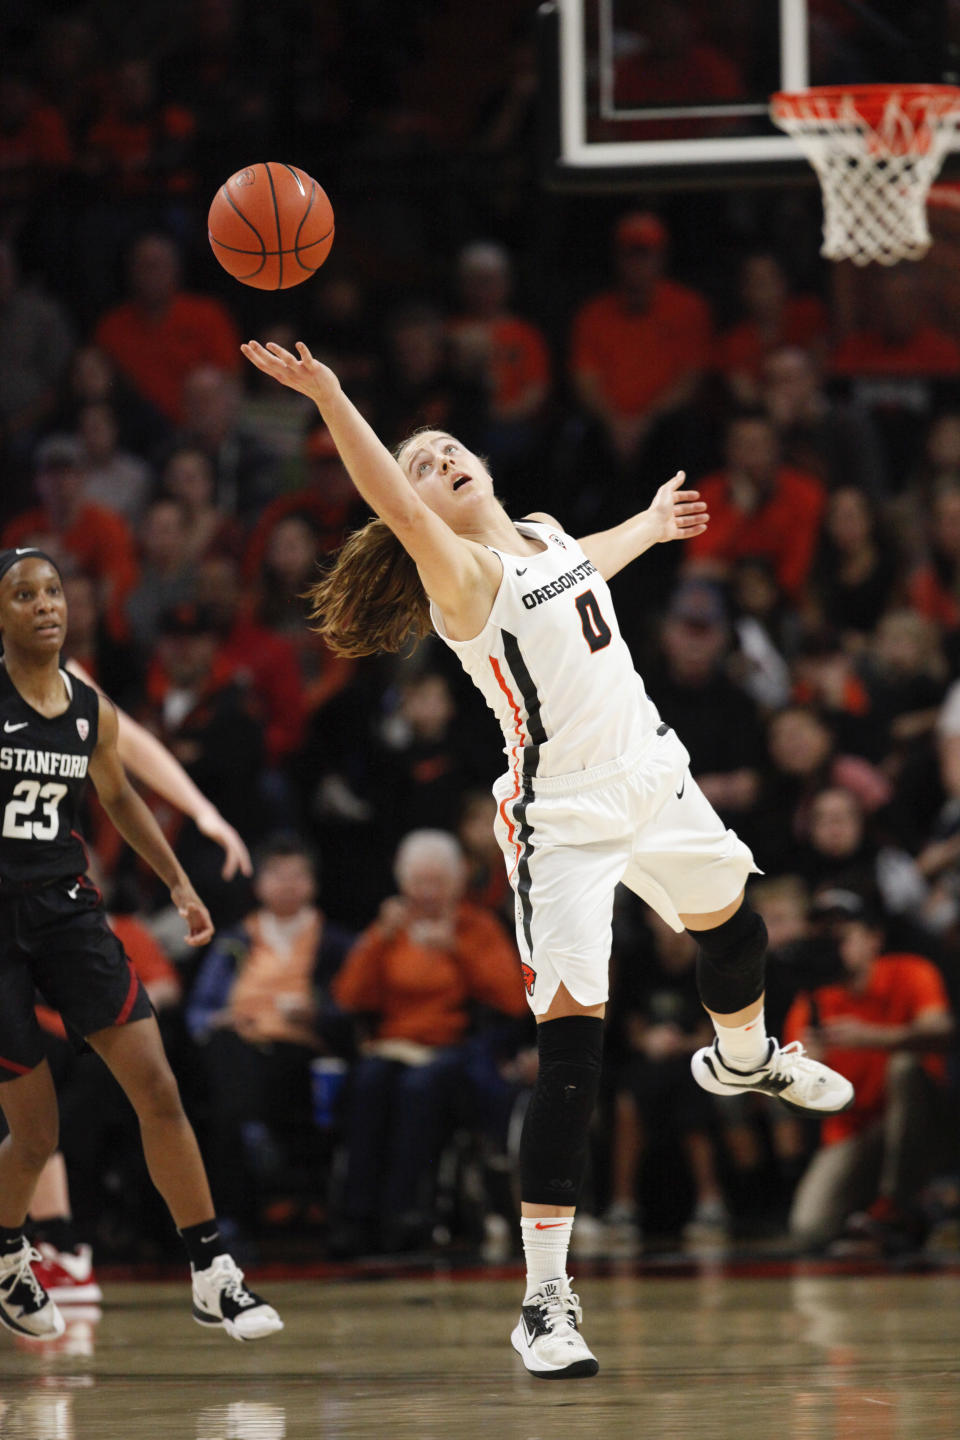 Oregon State's Mikayla Pivec (0) jumps backward to catch a pass from a teammate during the second half of an NCAA college basketball game against Stanford in Corvallis, Ore., Sunday, Jan. 19, 2020. (AP Photo/Amanda Loman)